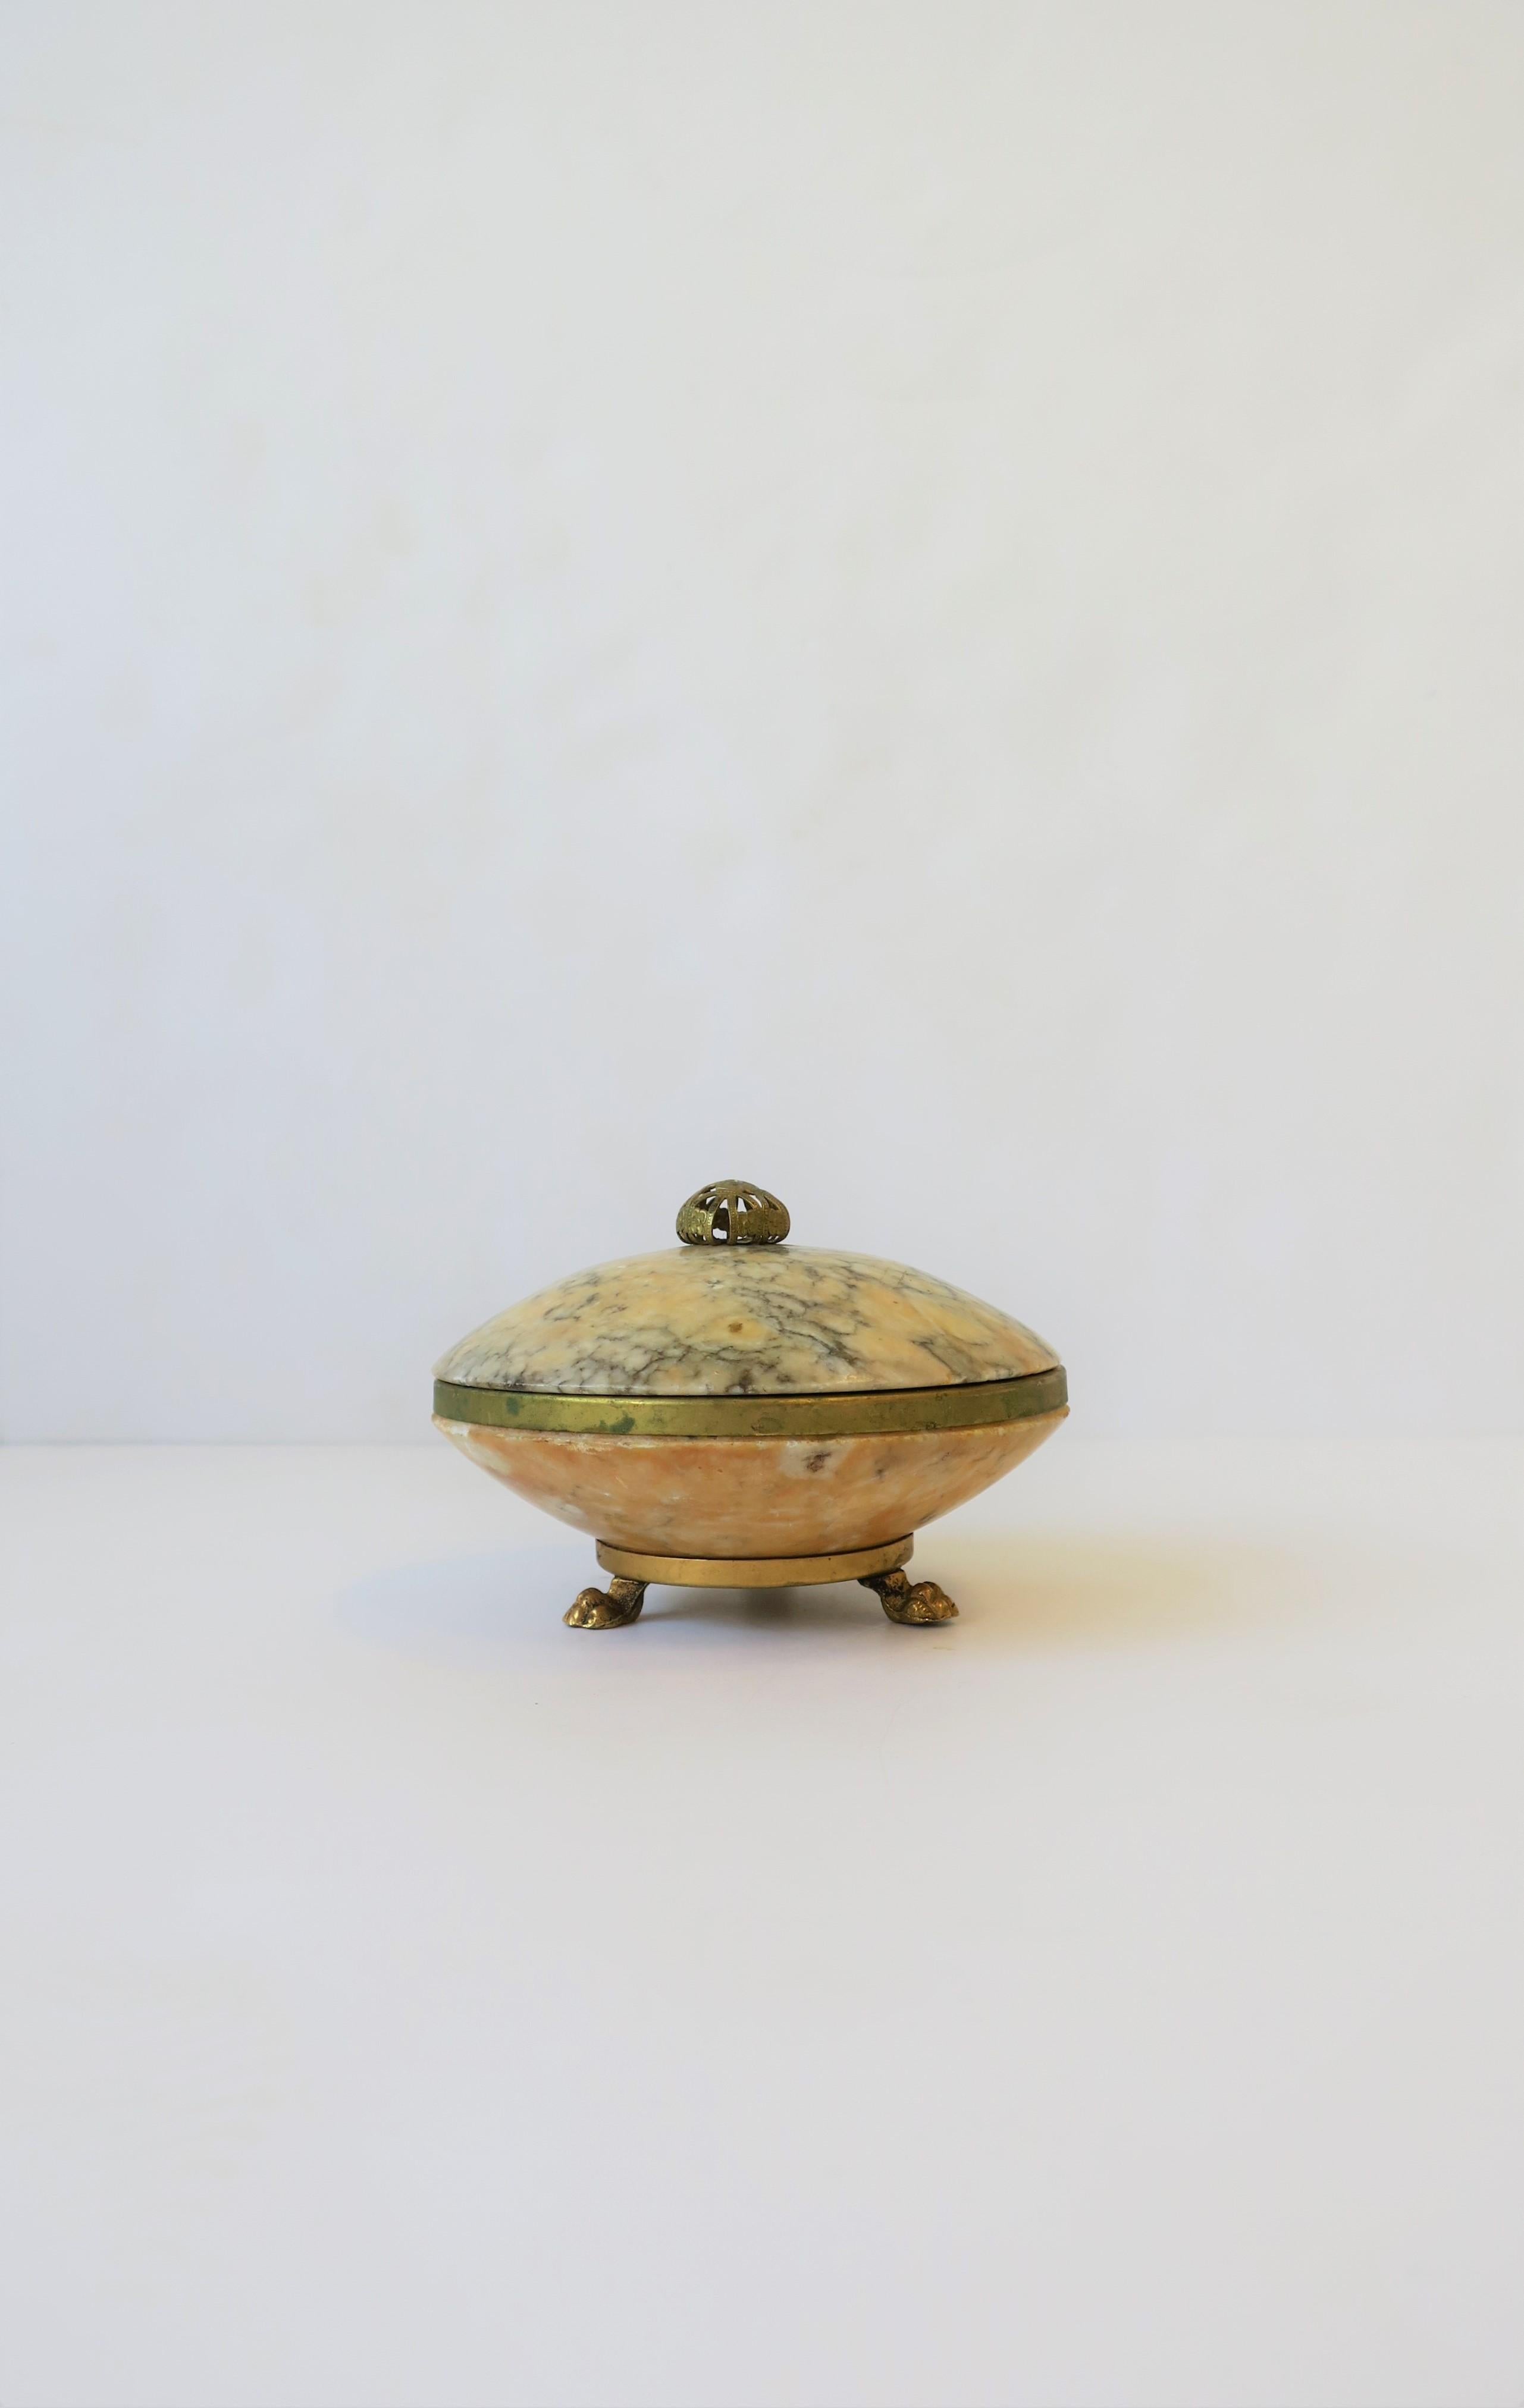 An Italian alabaster marble and brass round box in the neoclassical style, circa mid-20th century, Italy. Box has brass detailed top, brass band and three brass paw feet. A beautiful standalone piece, for jewelry (as demonstrated), or other items on